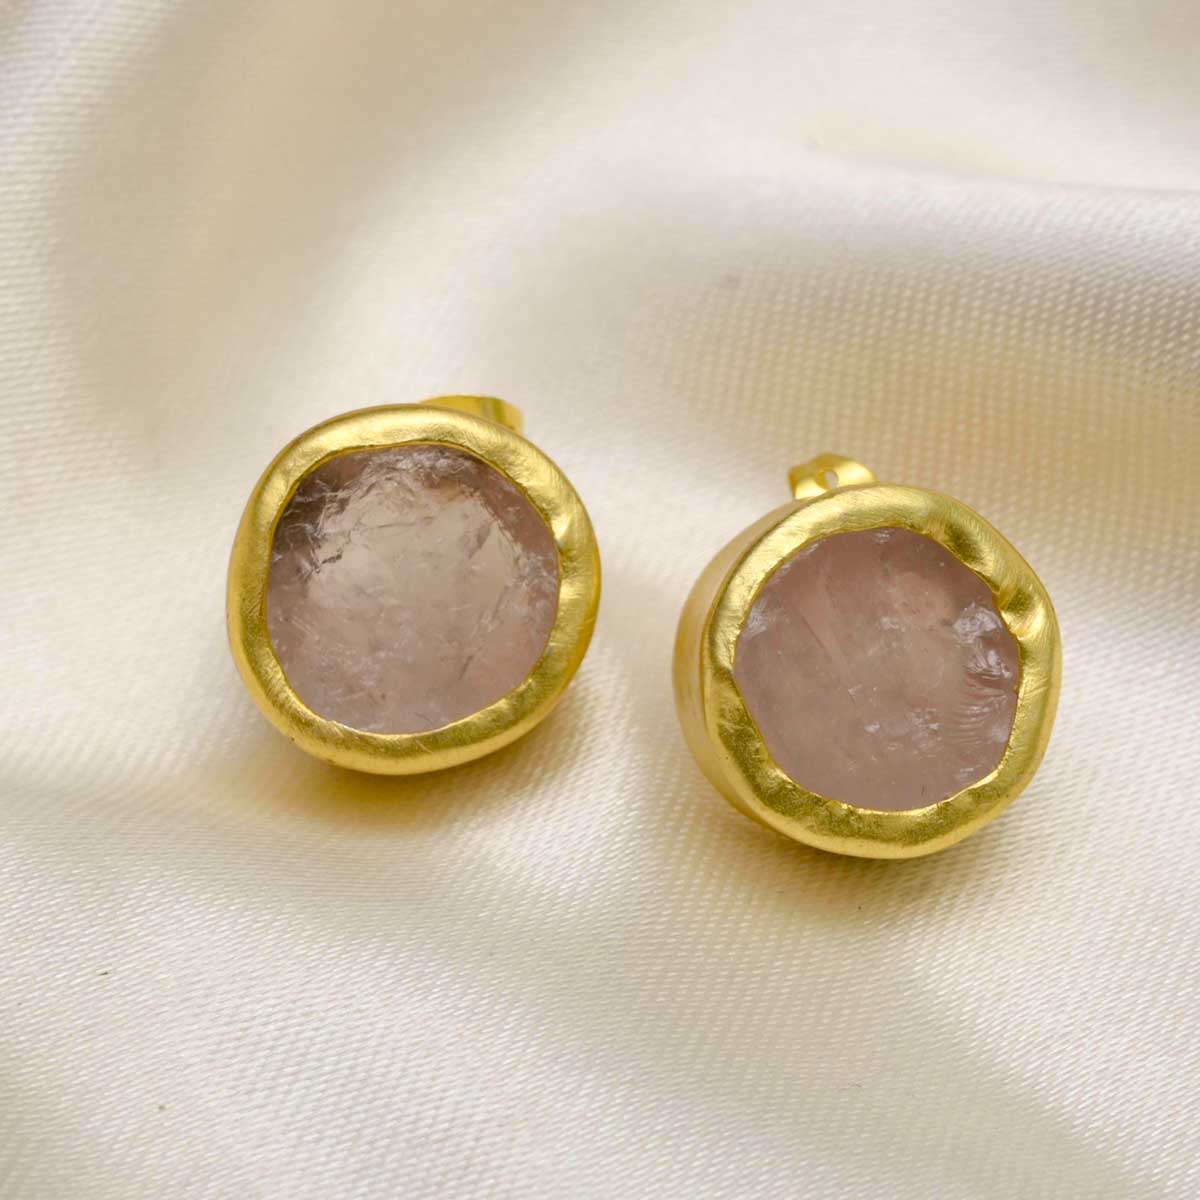 The Spirited Gold Stud Earrings with Rose quartz